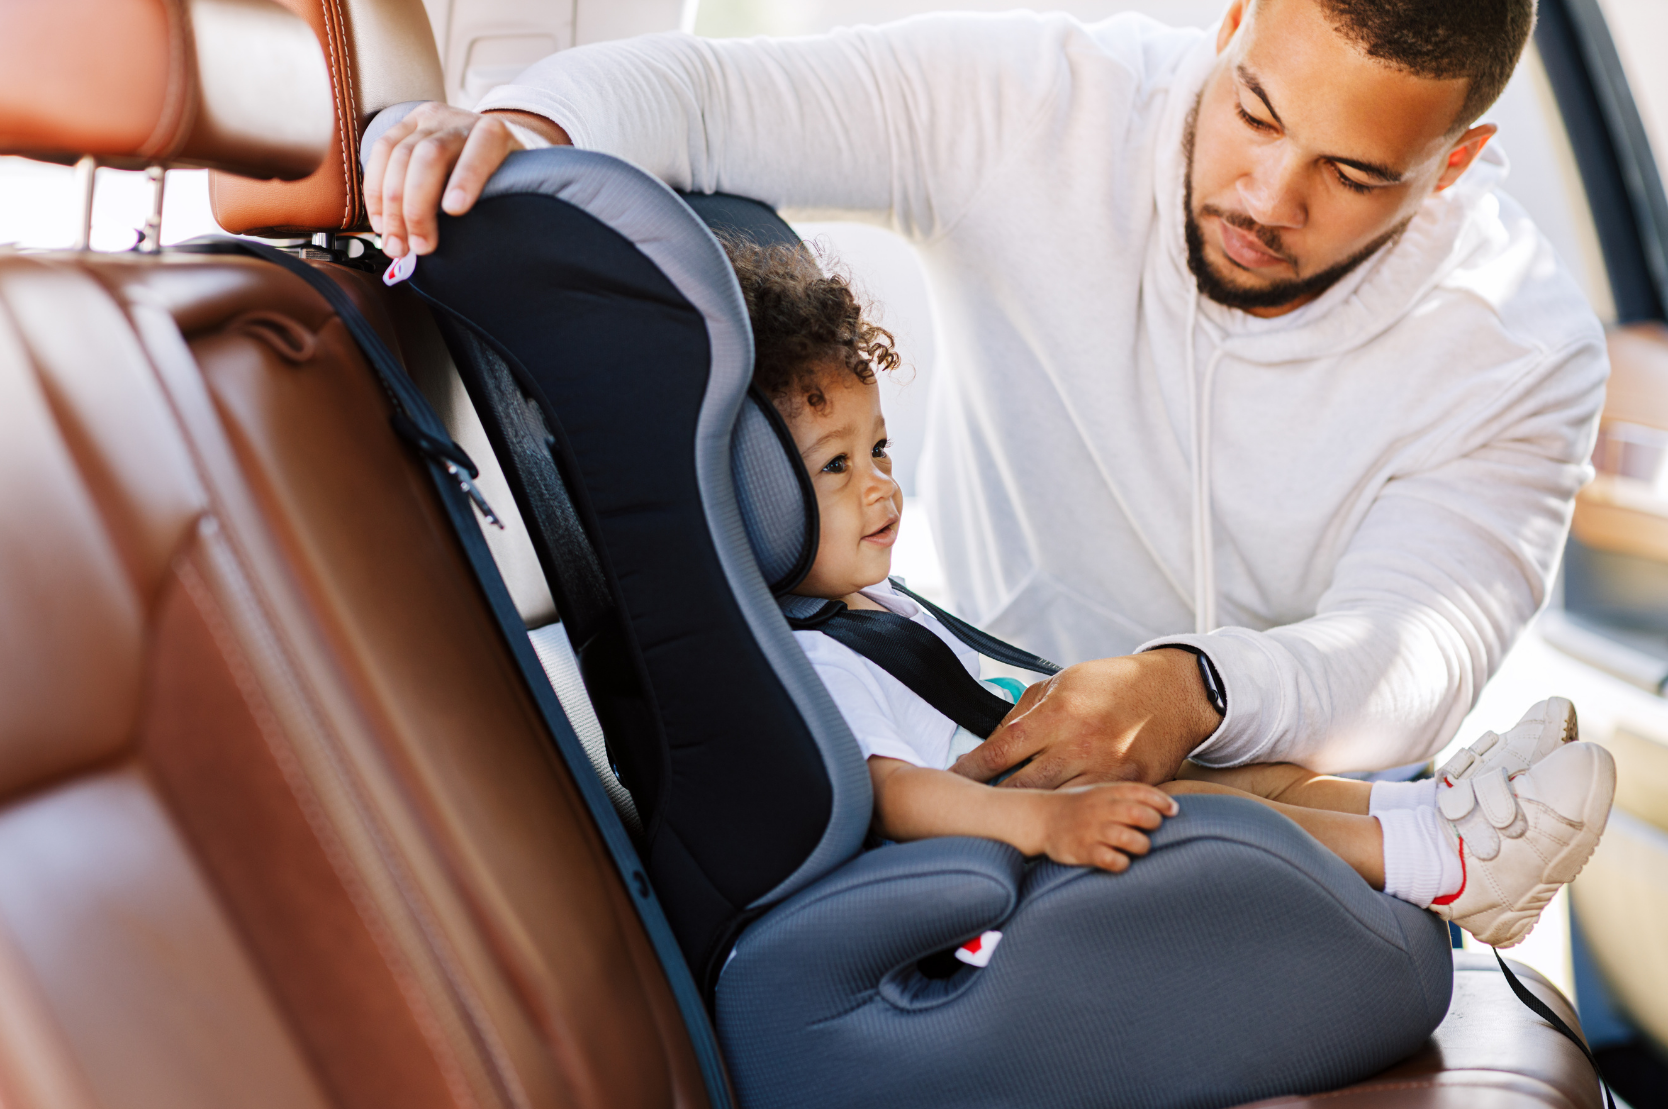 Car Seat Safety, Patient Education